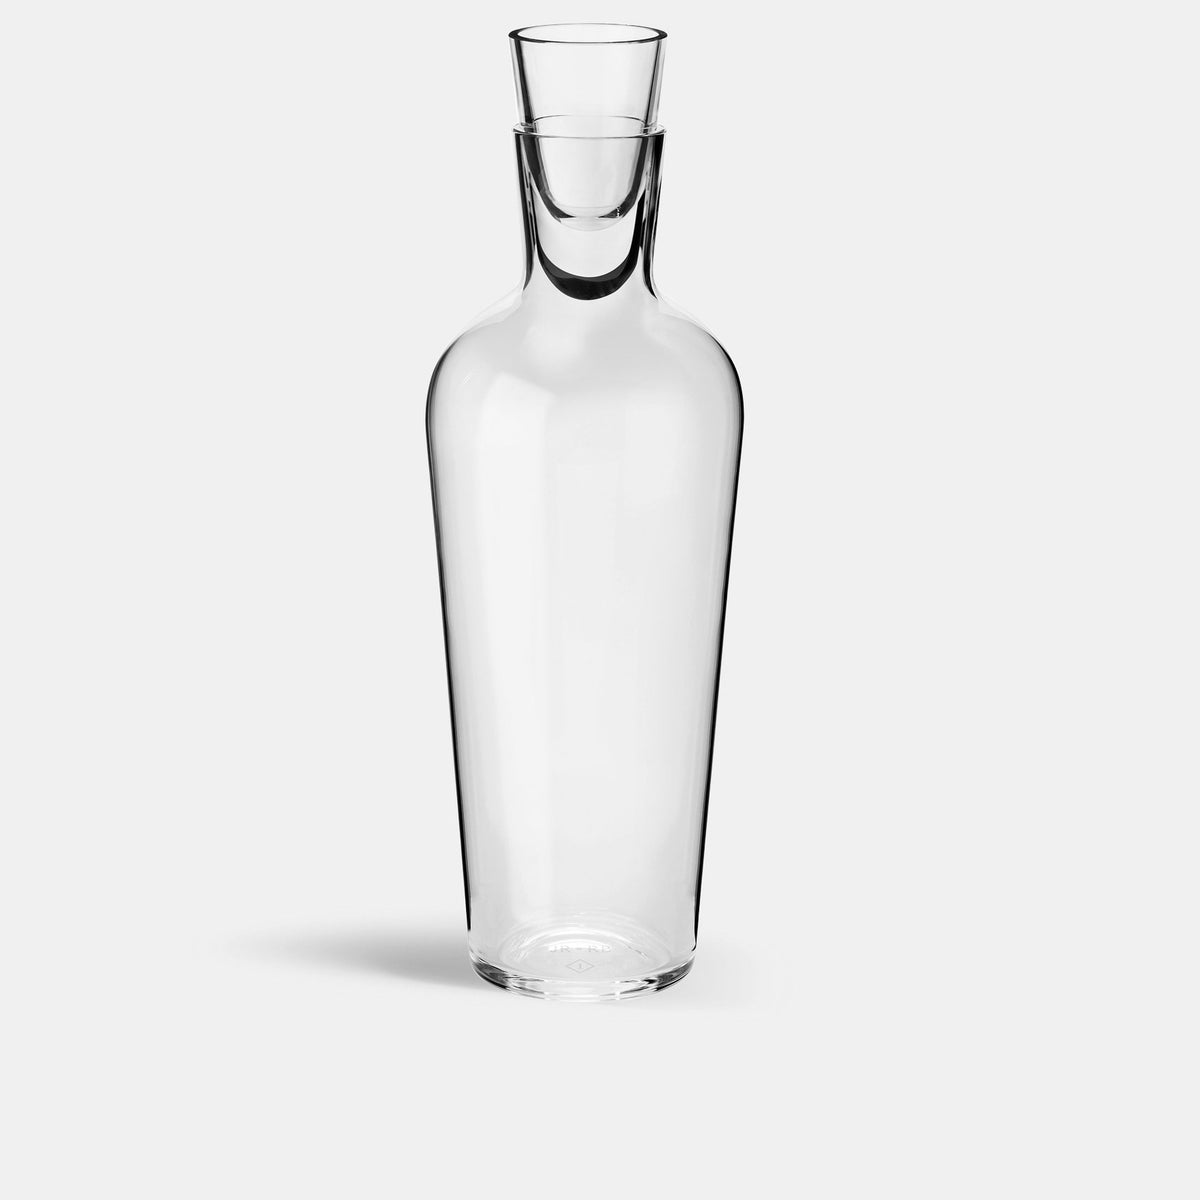 JR x RB: The Mature Wine Decanter